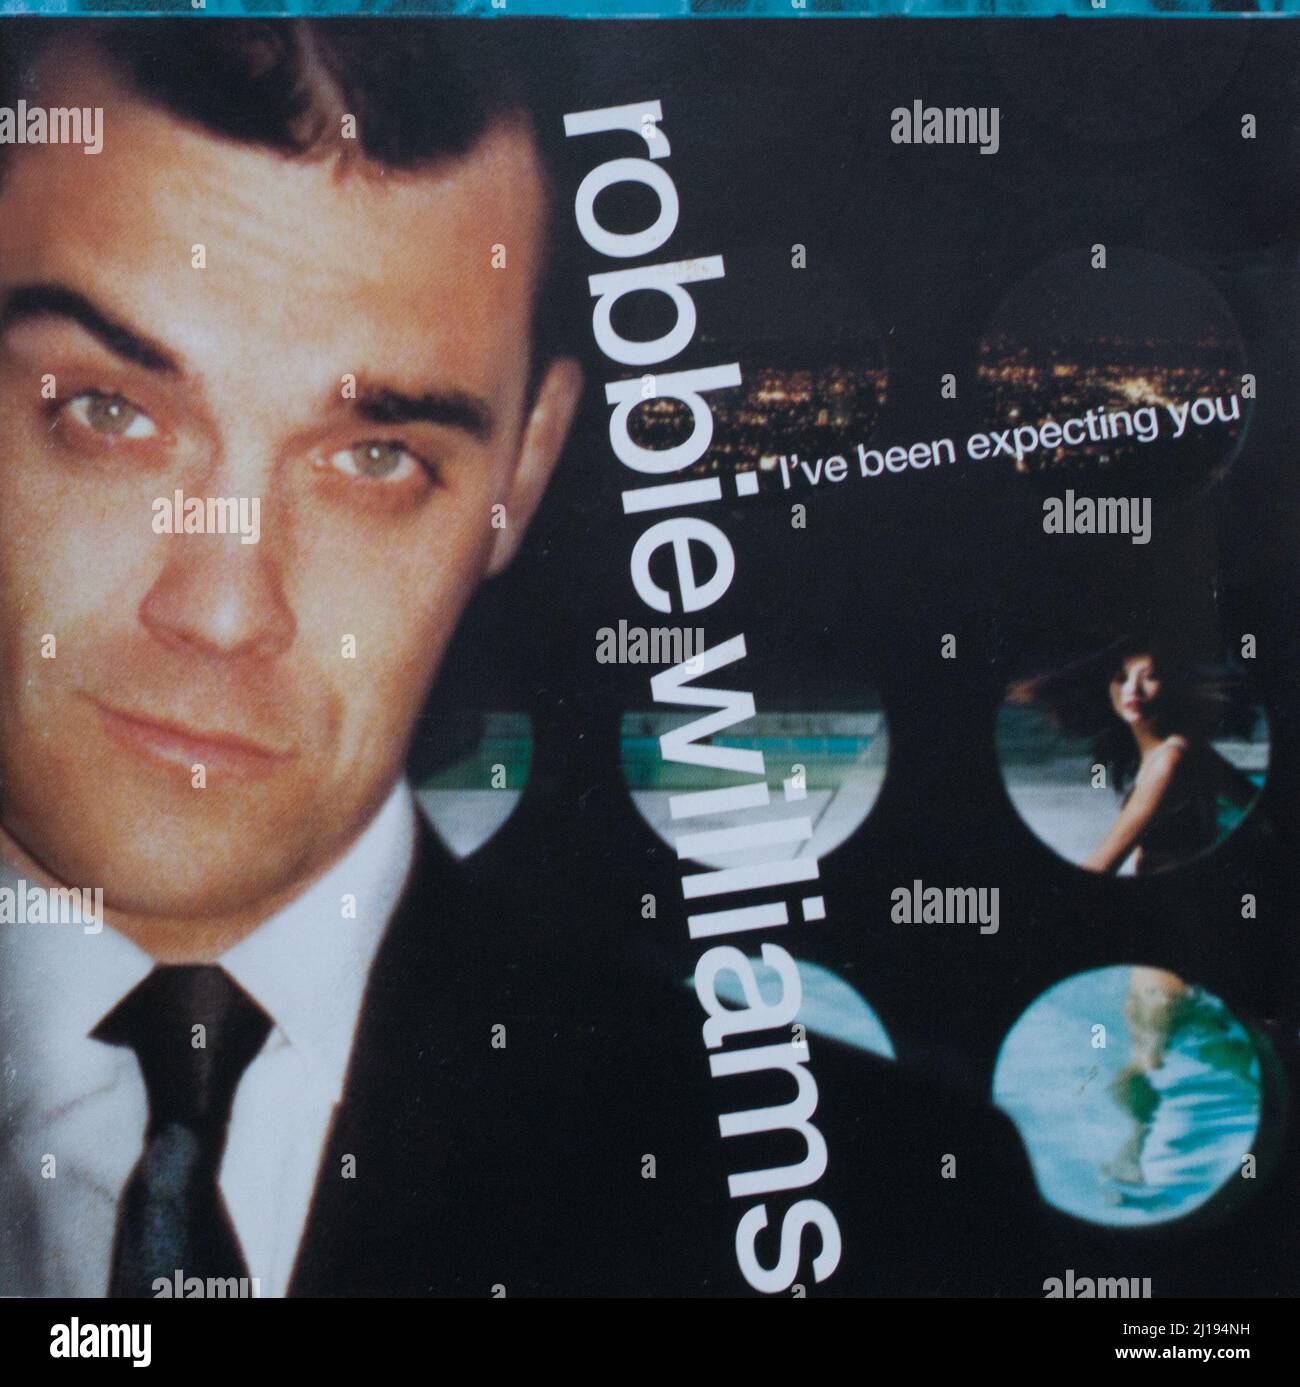 The Cd album cover to I've been expecting you by Robbie Williams Stock Photo